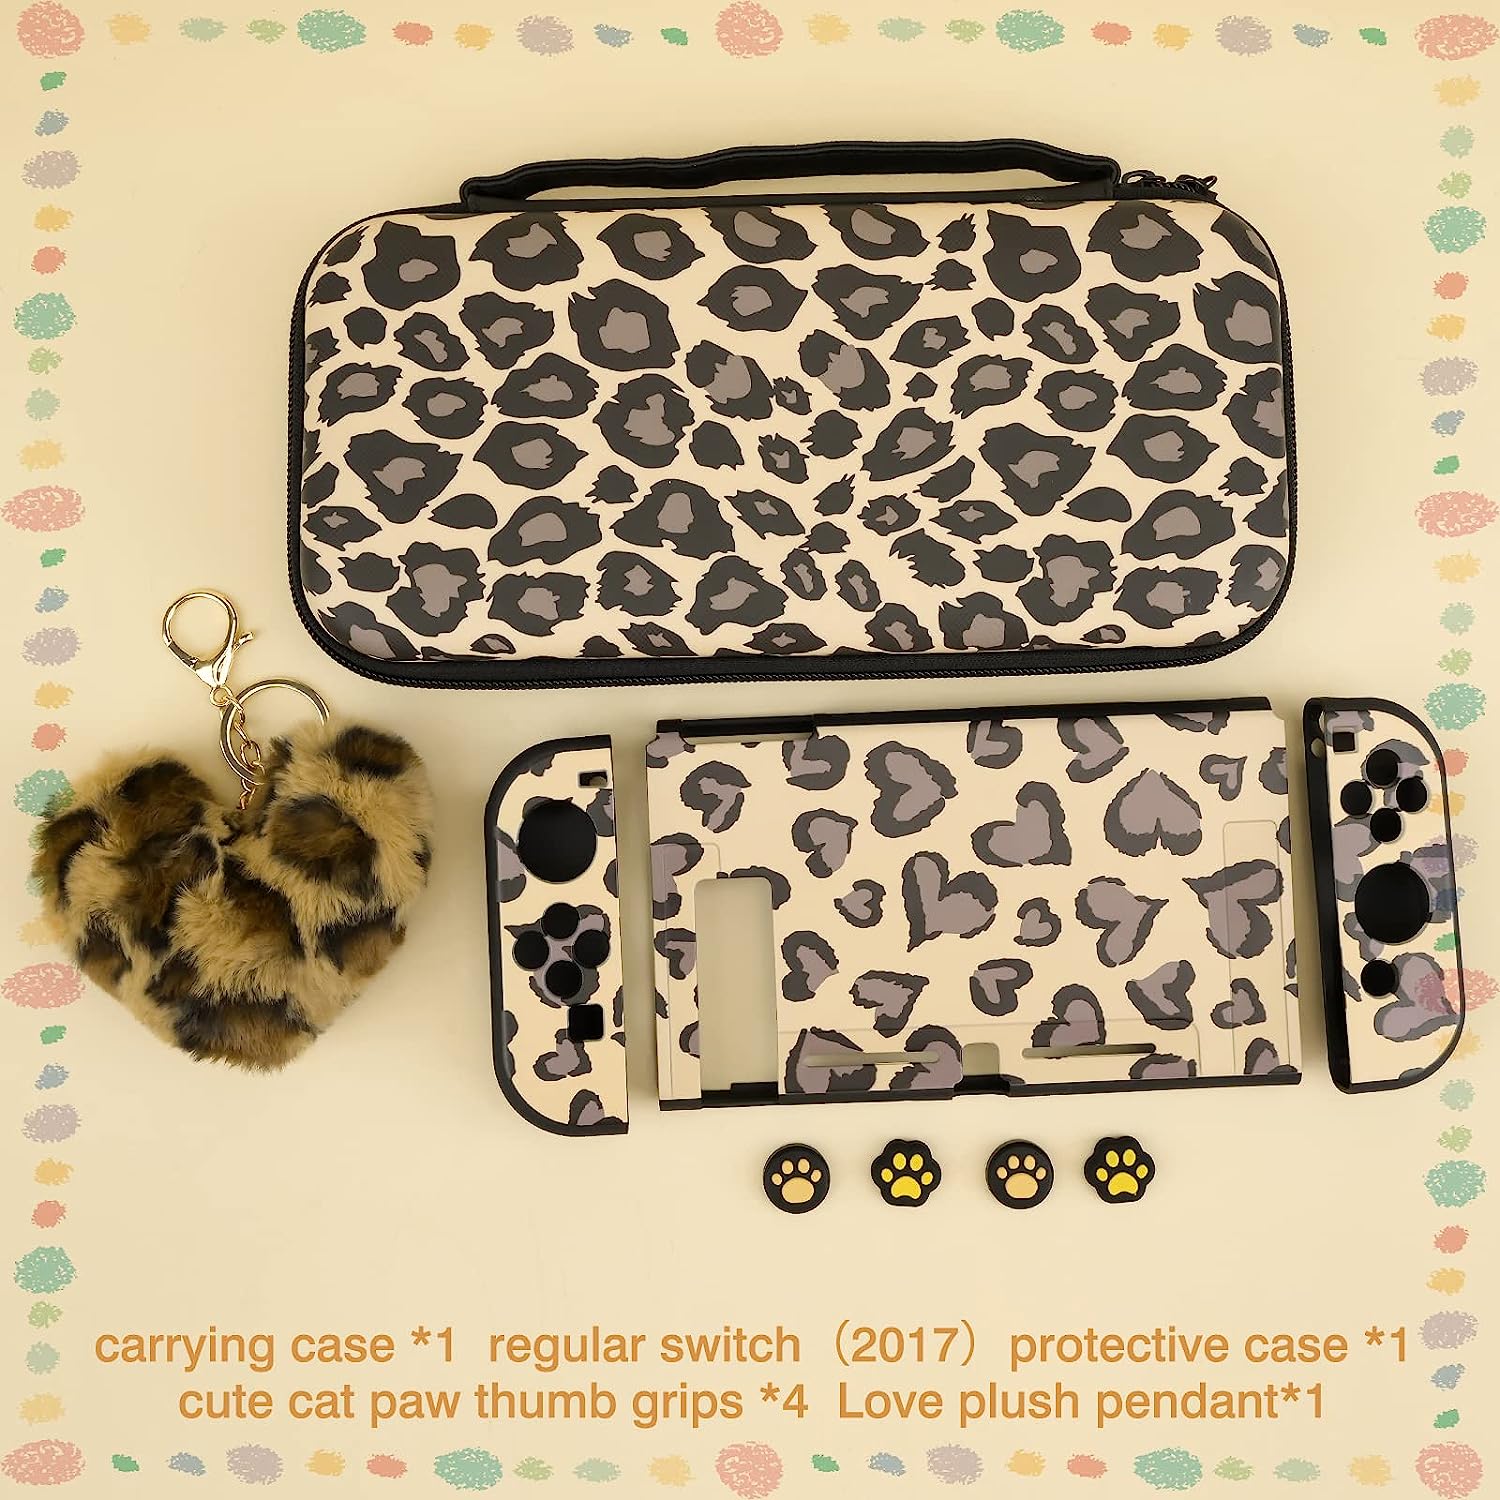 DLseego Brown Love Leopard Carrying Case for Switch, Cute Silicone Protective Case Soft Cover with 4PCS Thumb Grip Caps and Brown Plush Heart Pendant Hard Storage Case Accessories Kit Bundle for Girls